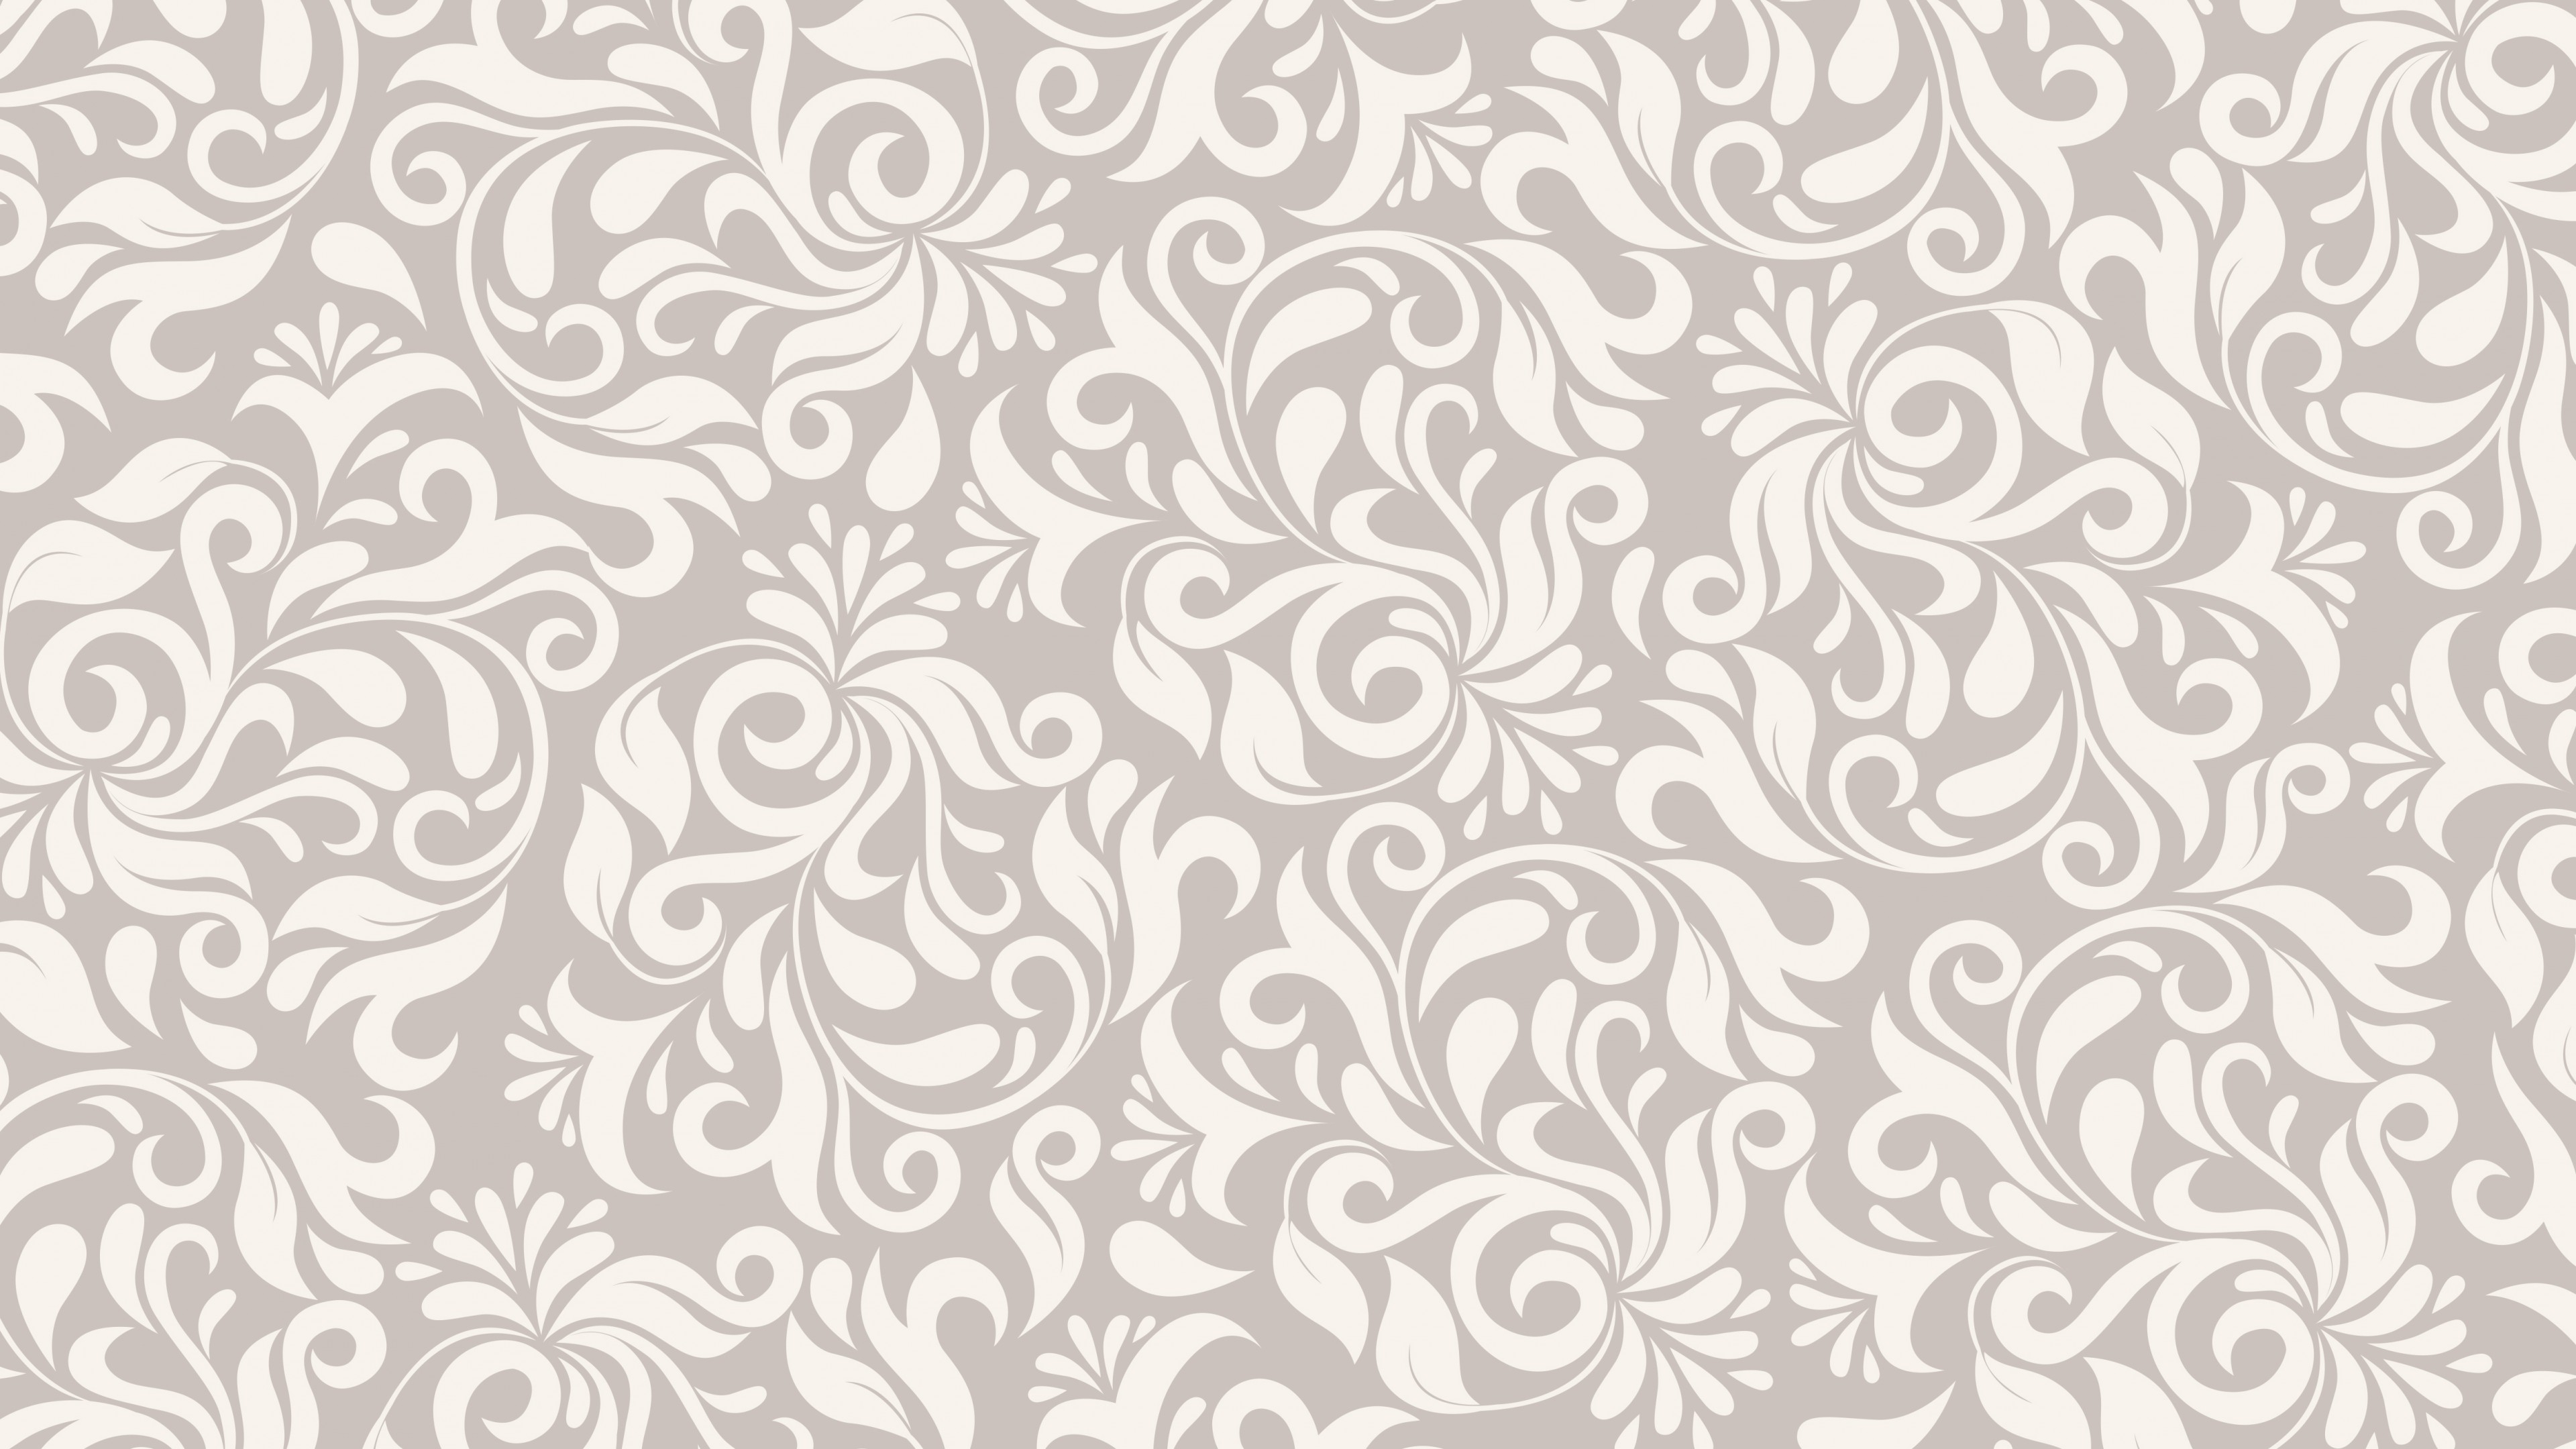 Floral Ornament Background Png - HD Wallpaper 